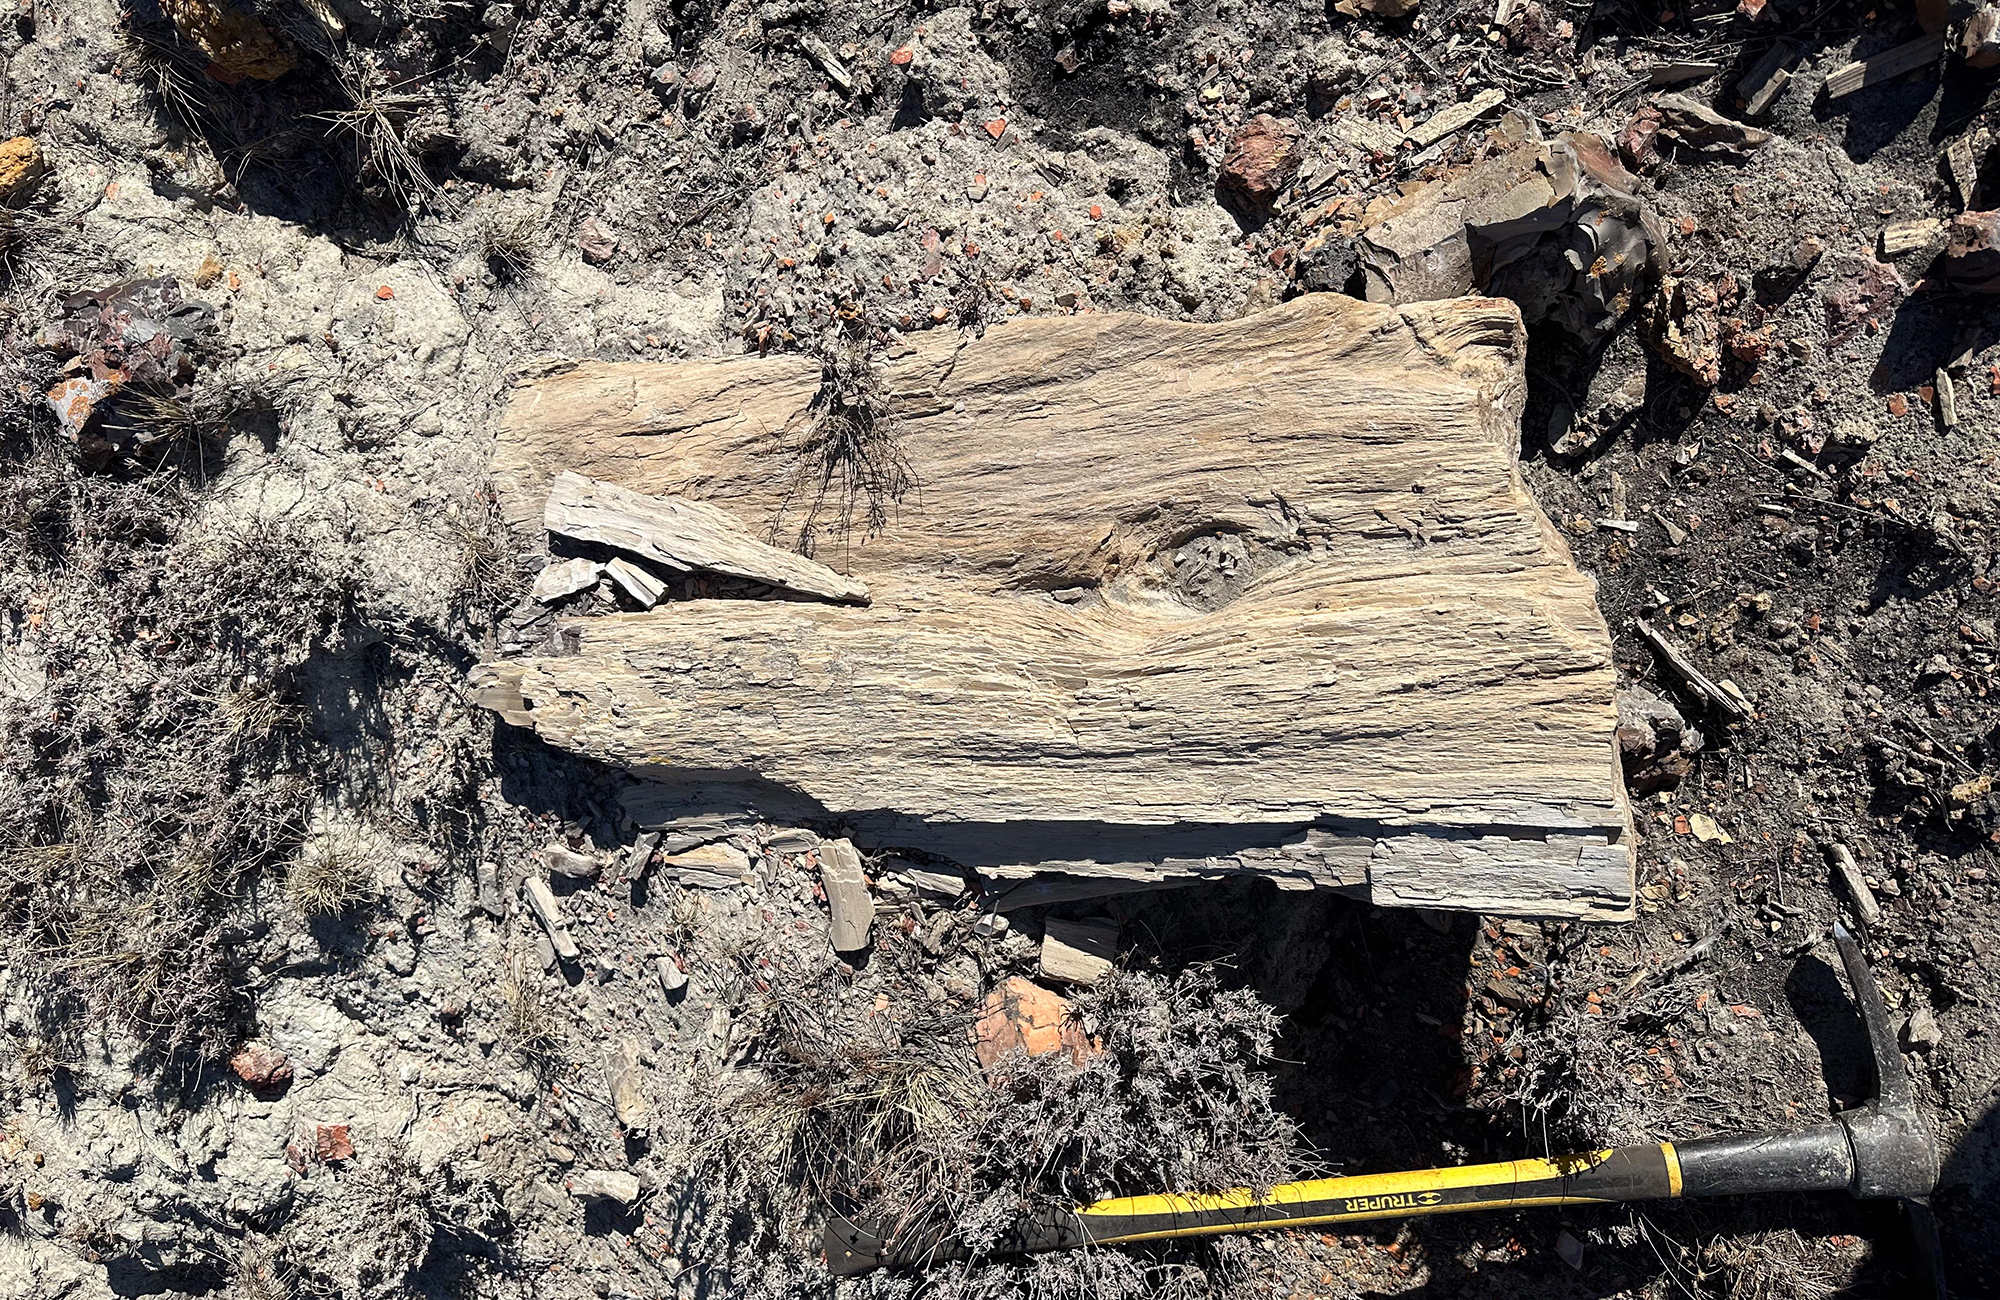 A piece of petrified wood laying on the ground next to a pick axe.